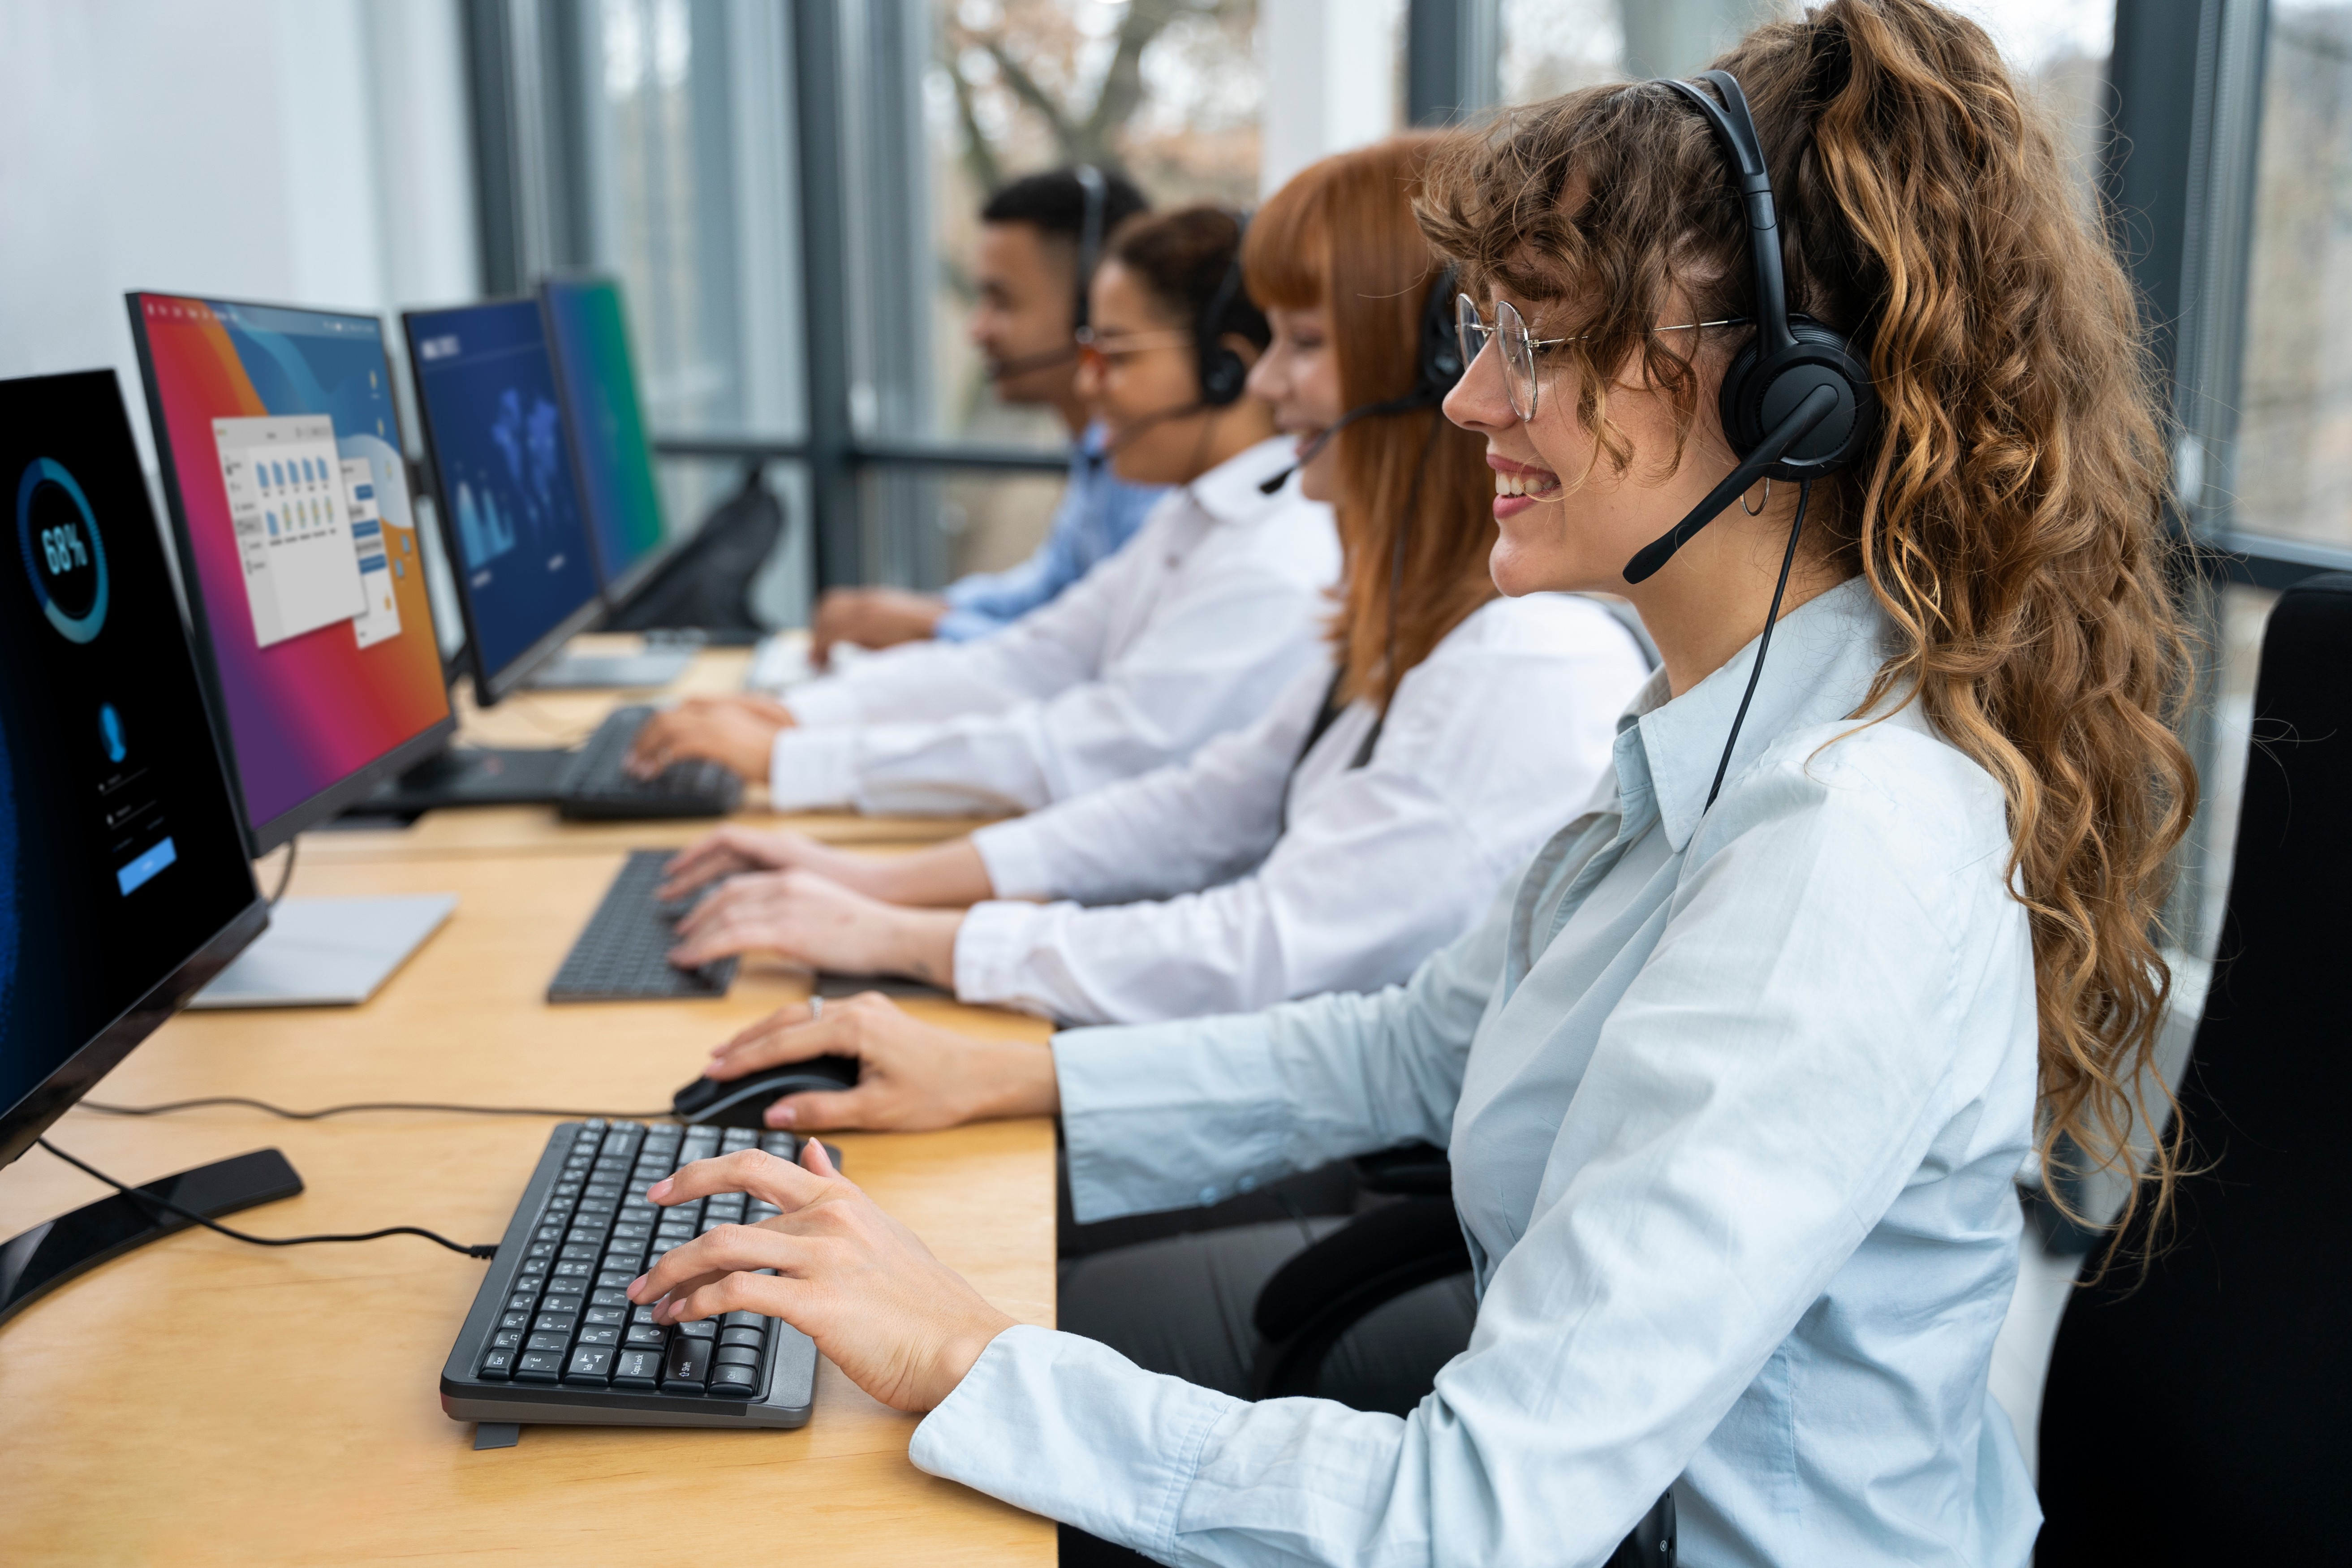 5 Benefits of Contracting Out Your Help Desk Services